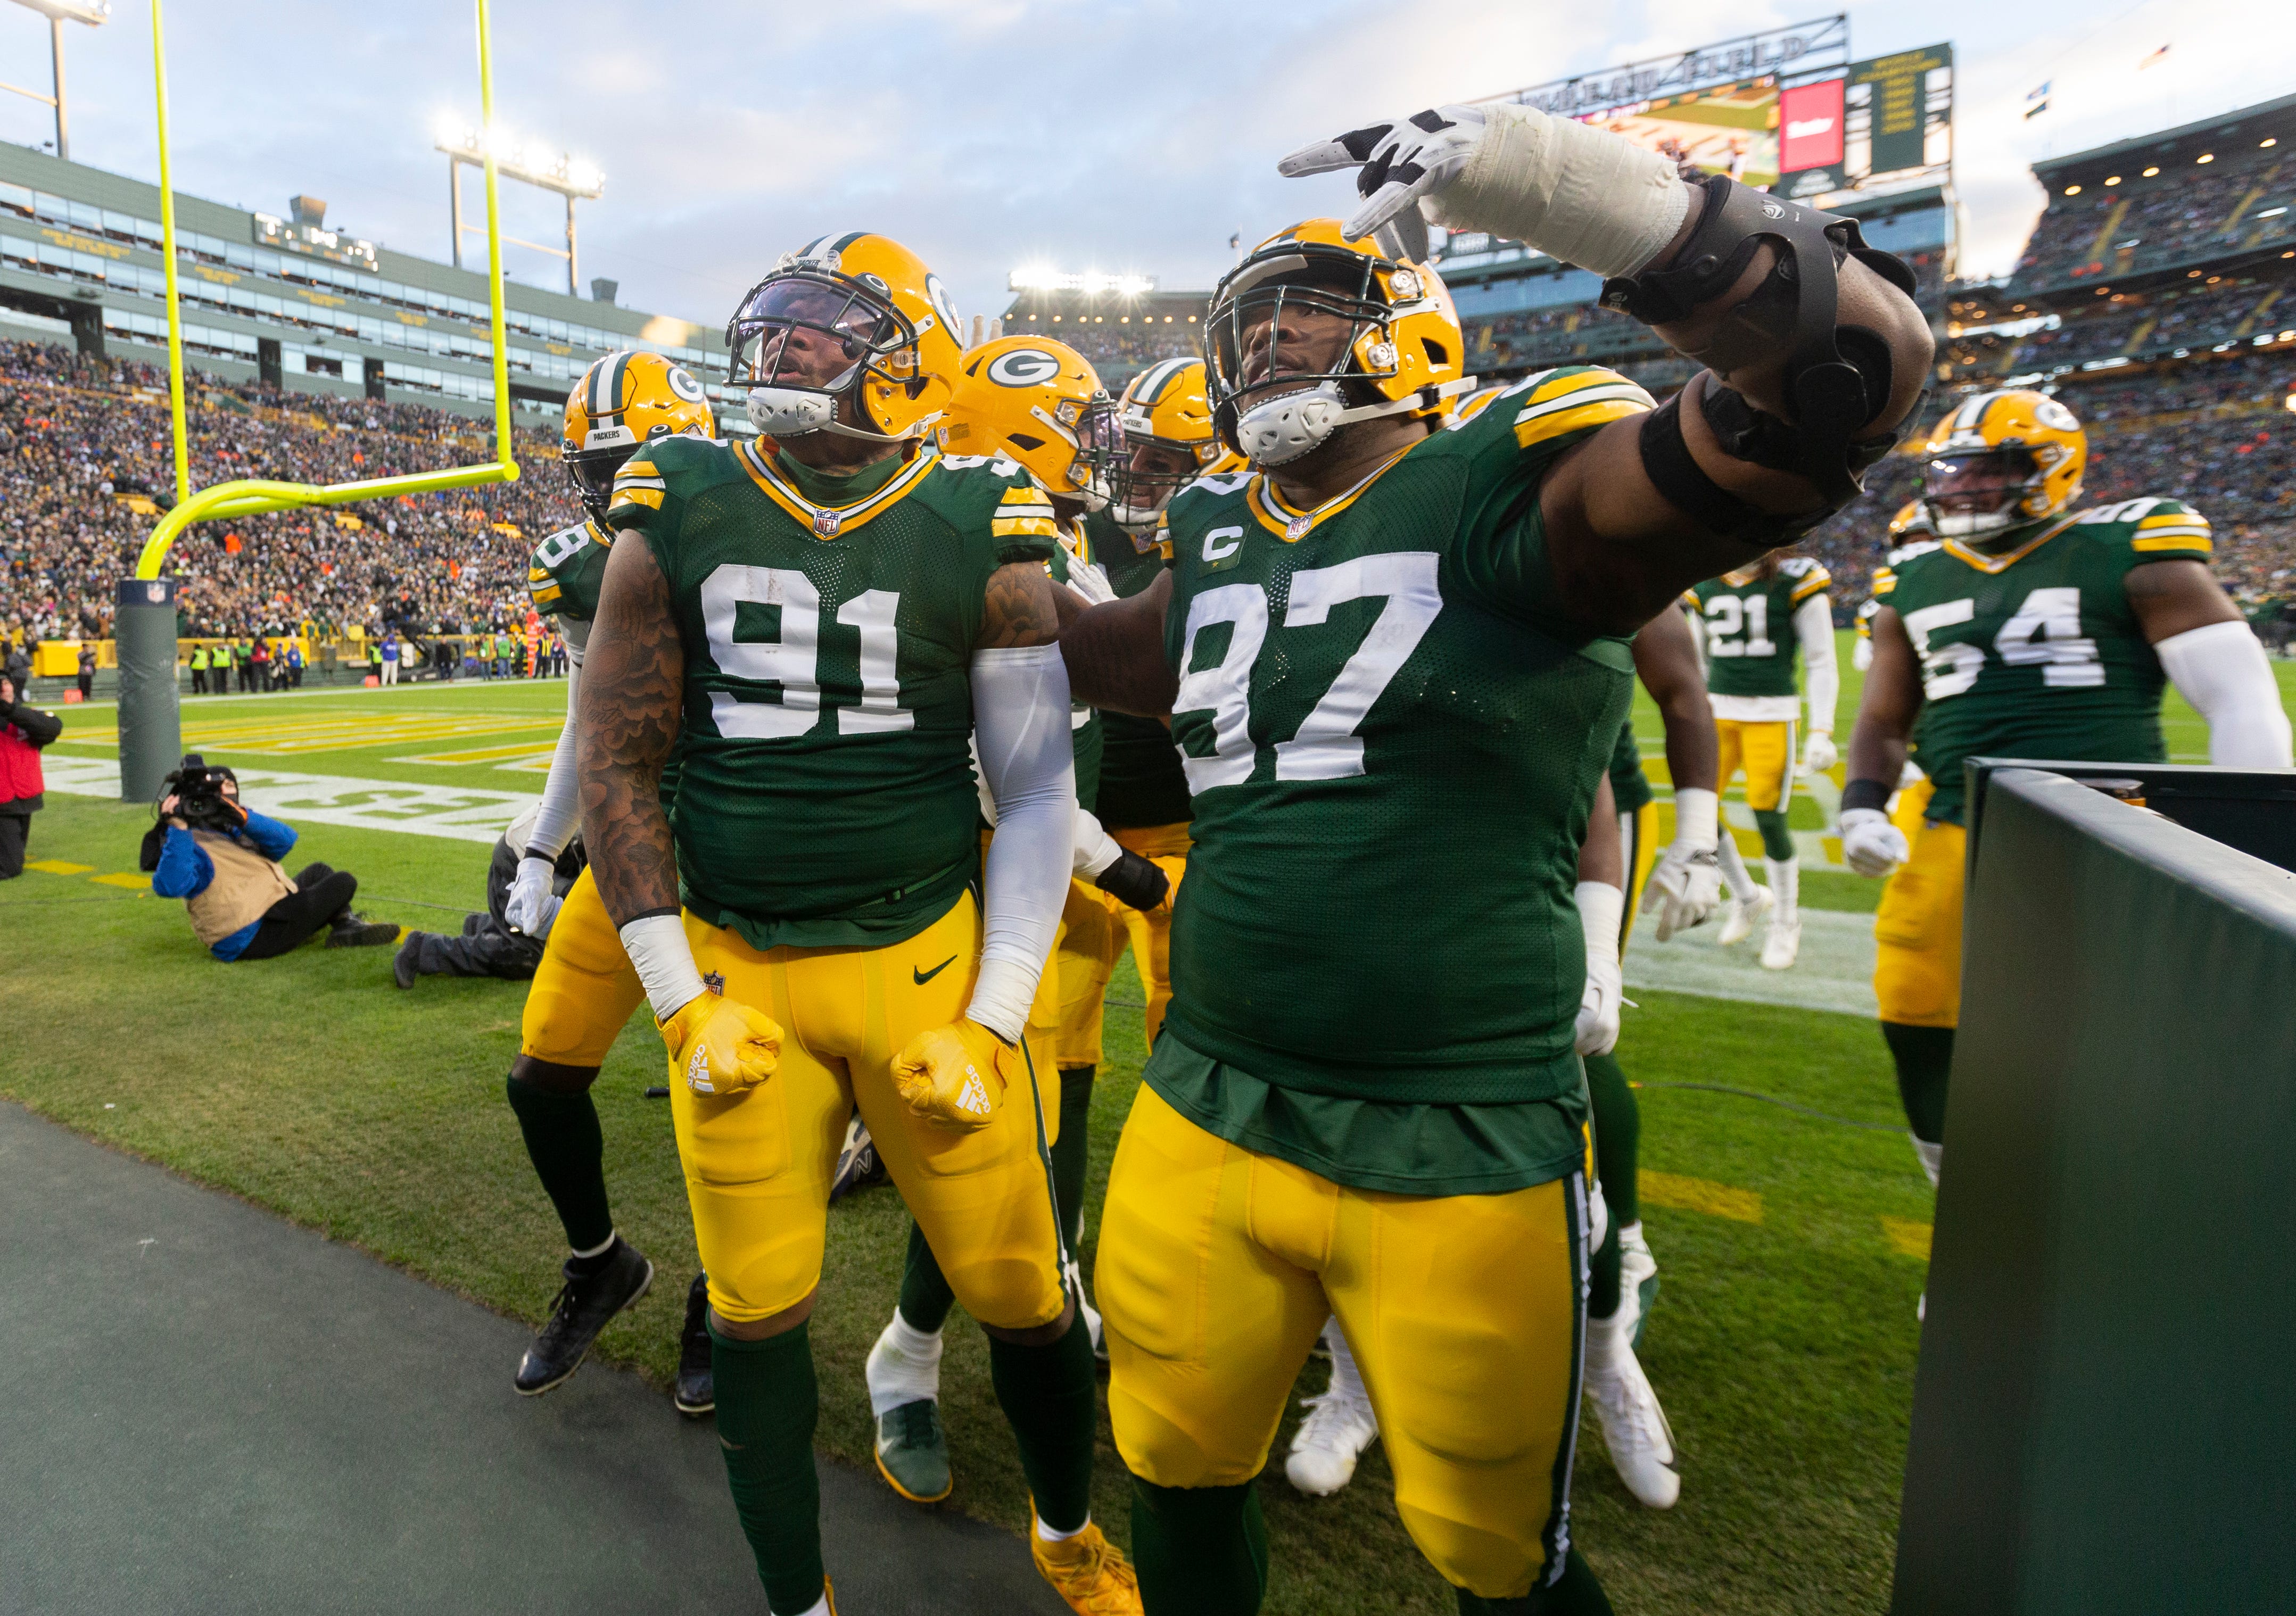 Green Bay Packers outside linebacker Preston Smith (91) celebrates his fumble recovery during the first quarter of their game Sunday, November 28, 2021 at Lambeau Field in Green Bay, Wis.The Green Bay Packers beat the Los Angeles Rams 36-28.